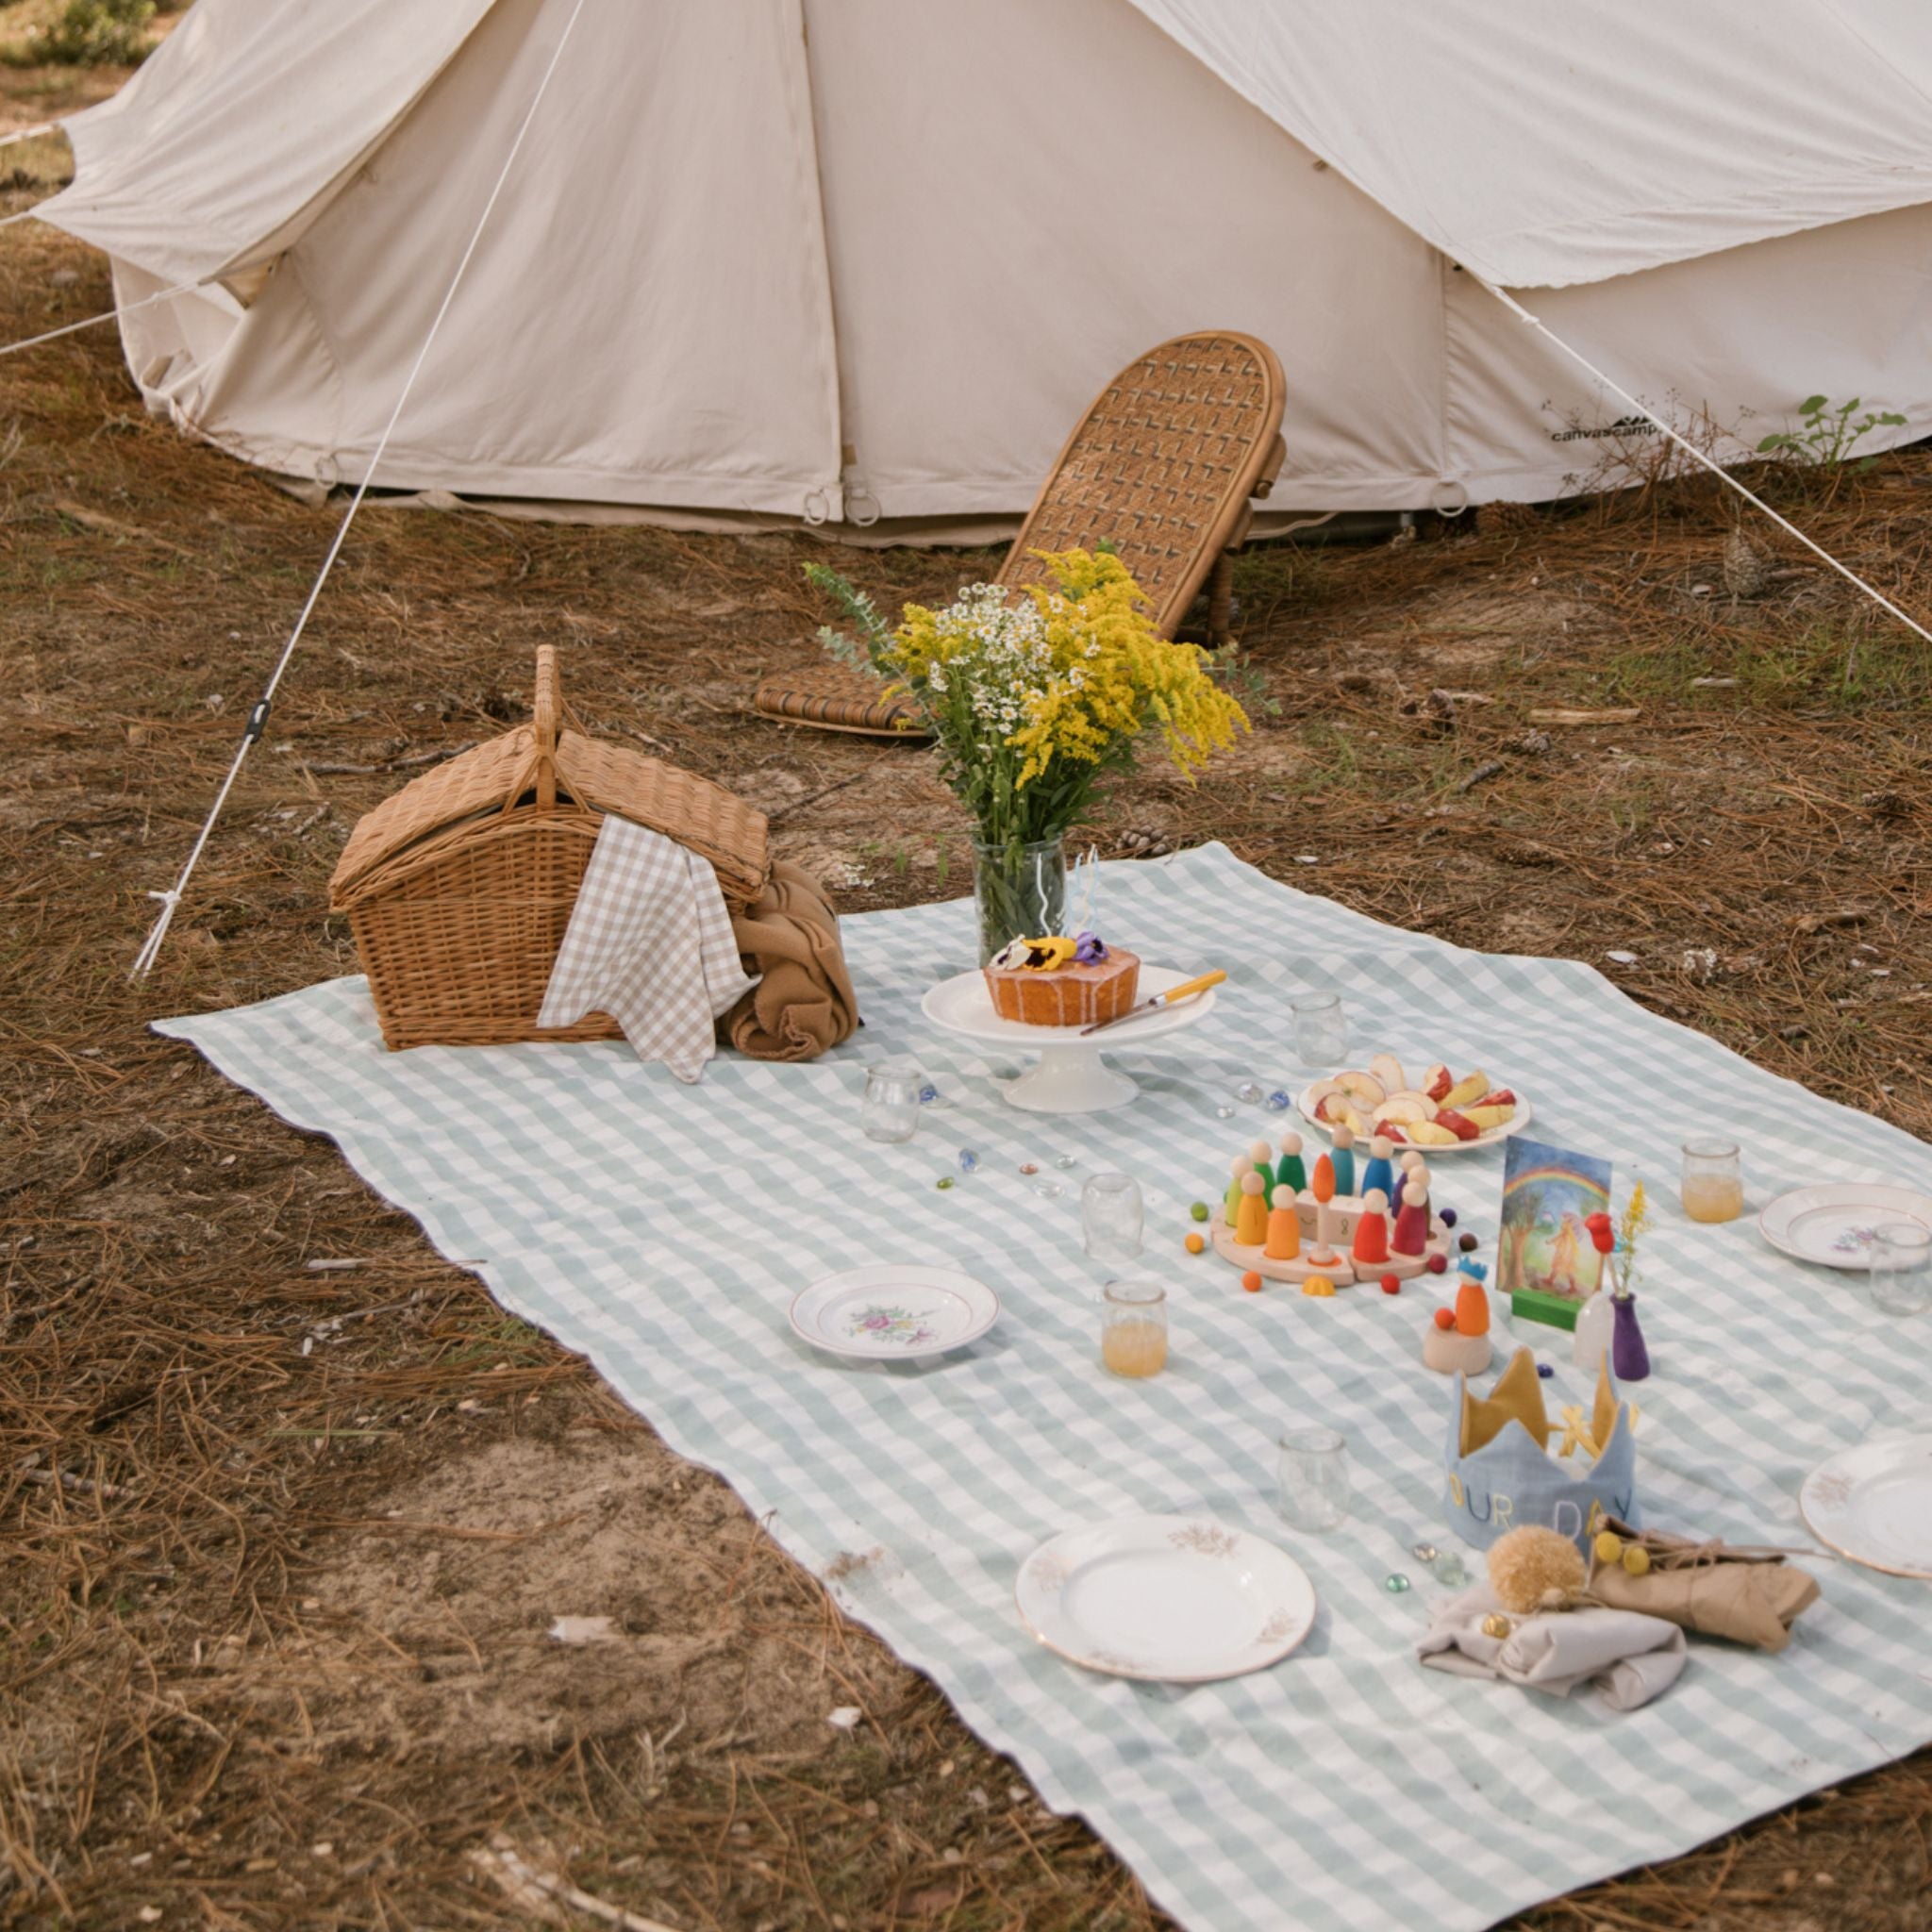 Grapat Your Day - Pieces On Picnic Blanket In Front Of Tent